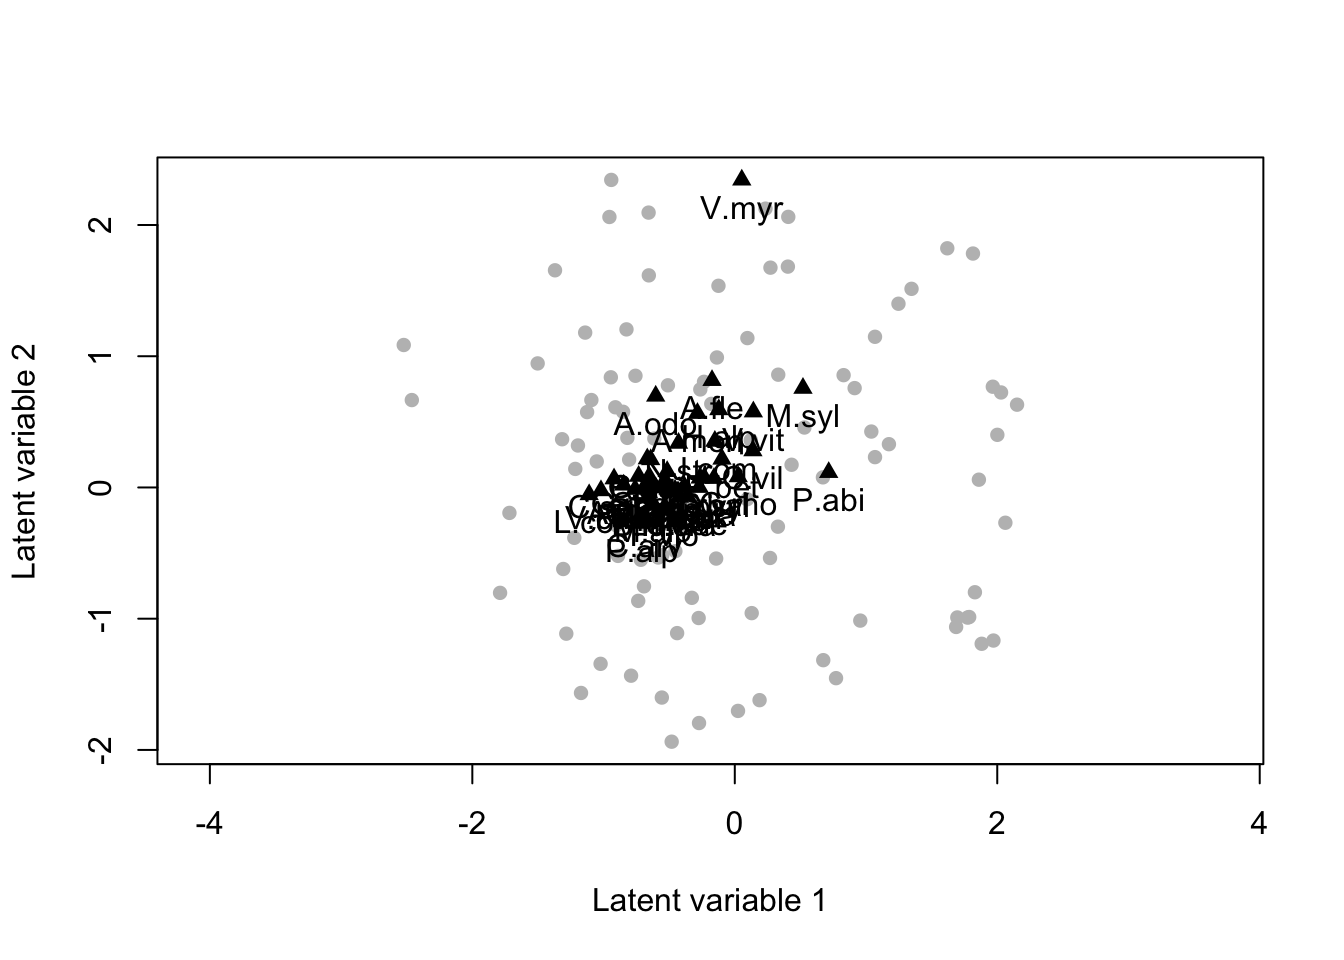 Model based ordination analysis. The two latent variables can be seen as missing covariates, and the position of species (black triangle) on the plot the way species respond to those missing covariates. Species close in the the latent variable species are positively correlated and viceversa.